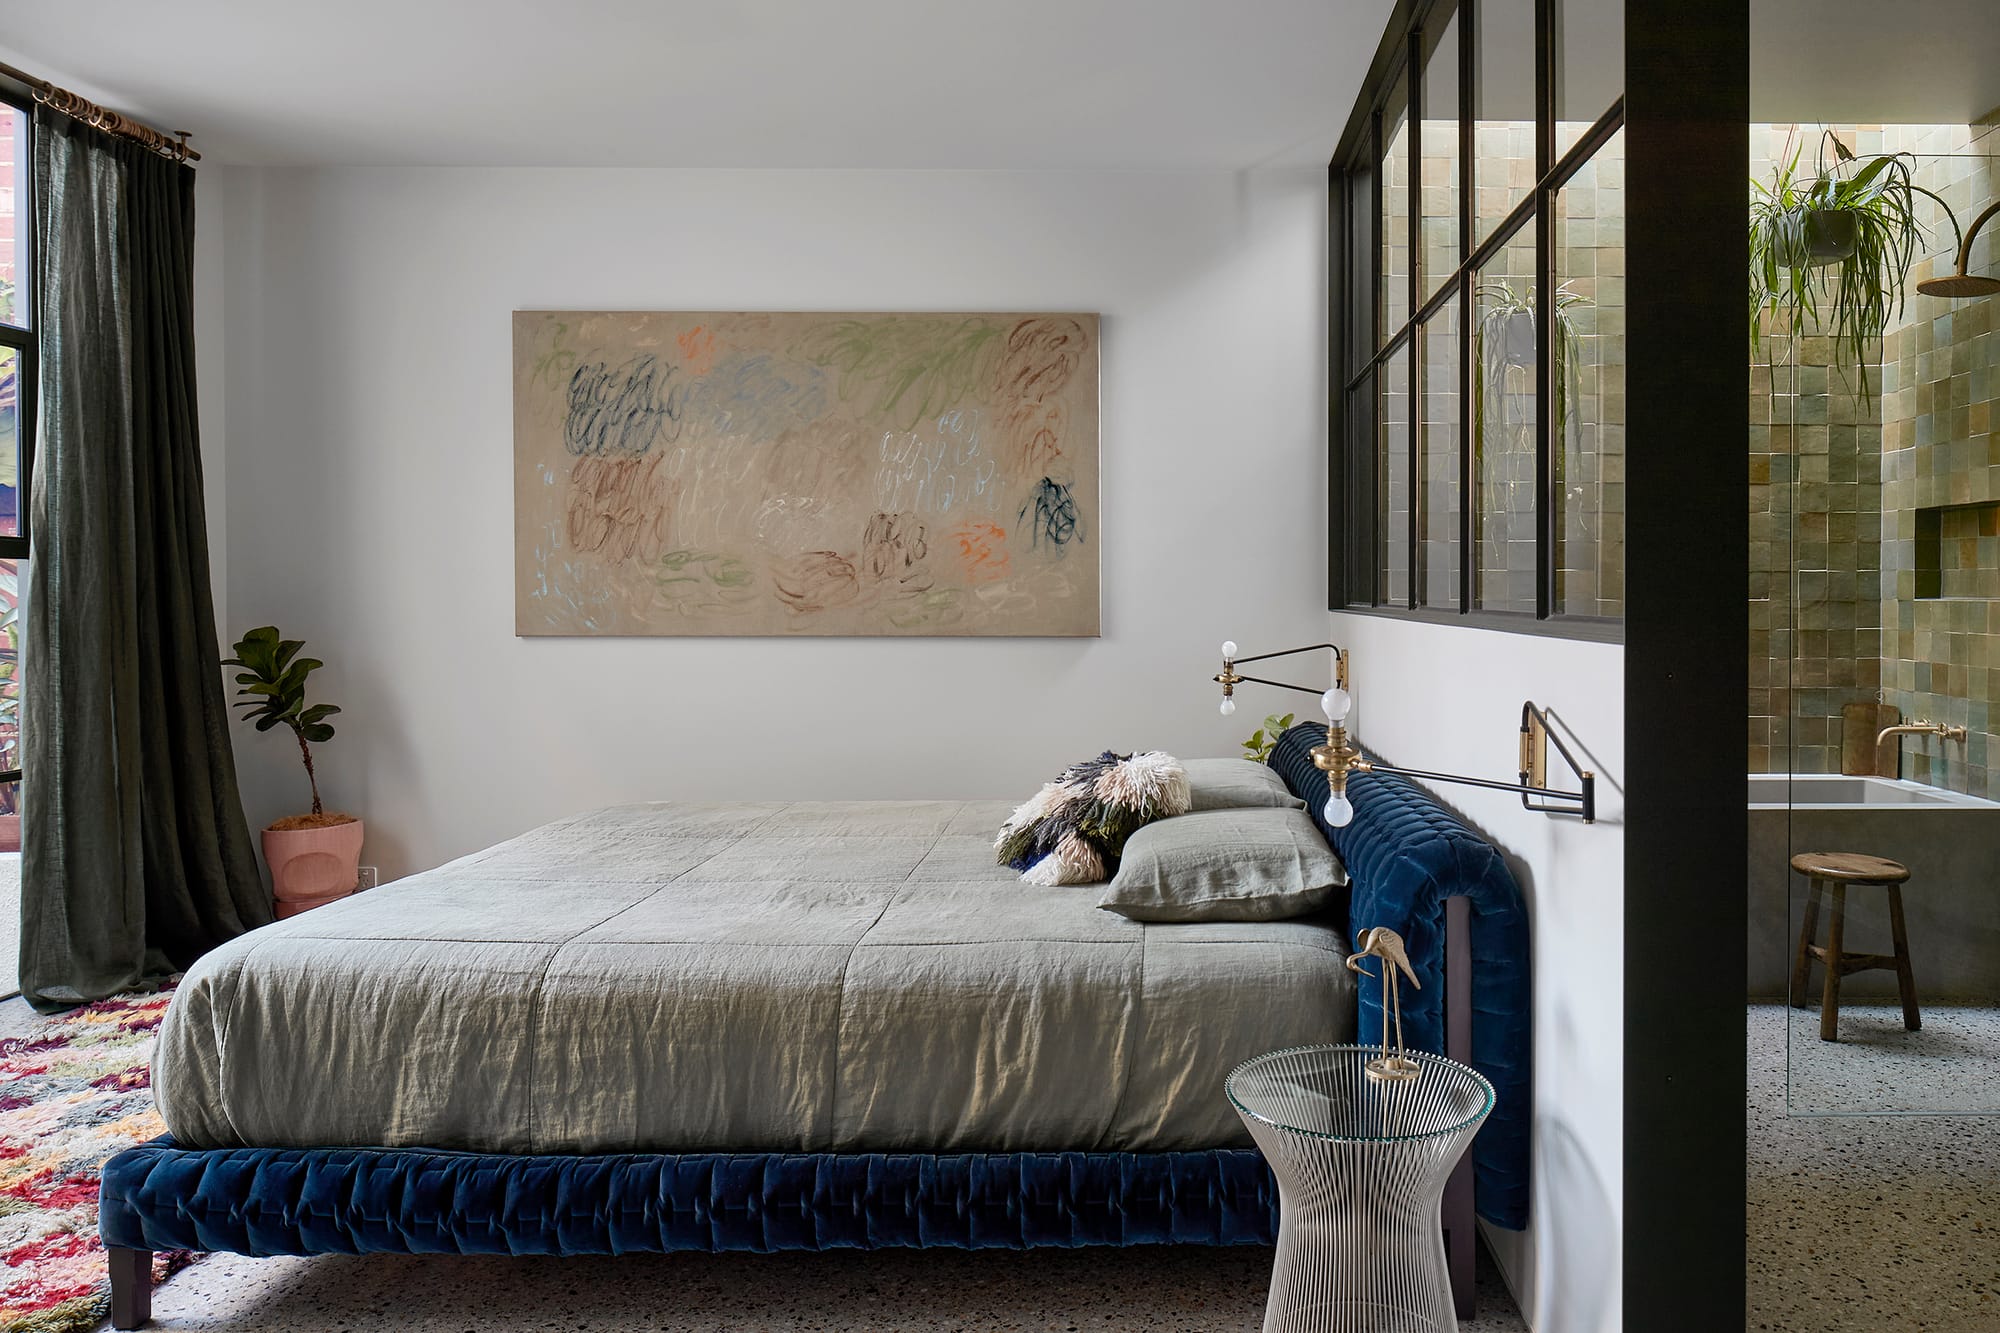 Fabrica by mcmahon and nerlich. Photography by Shannon McGrath. Master bedroom with blue velet bedframe and white walls. Windowed wall looking onto ensuite with green wall tiles and hanging plants. 